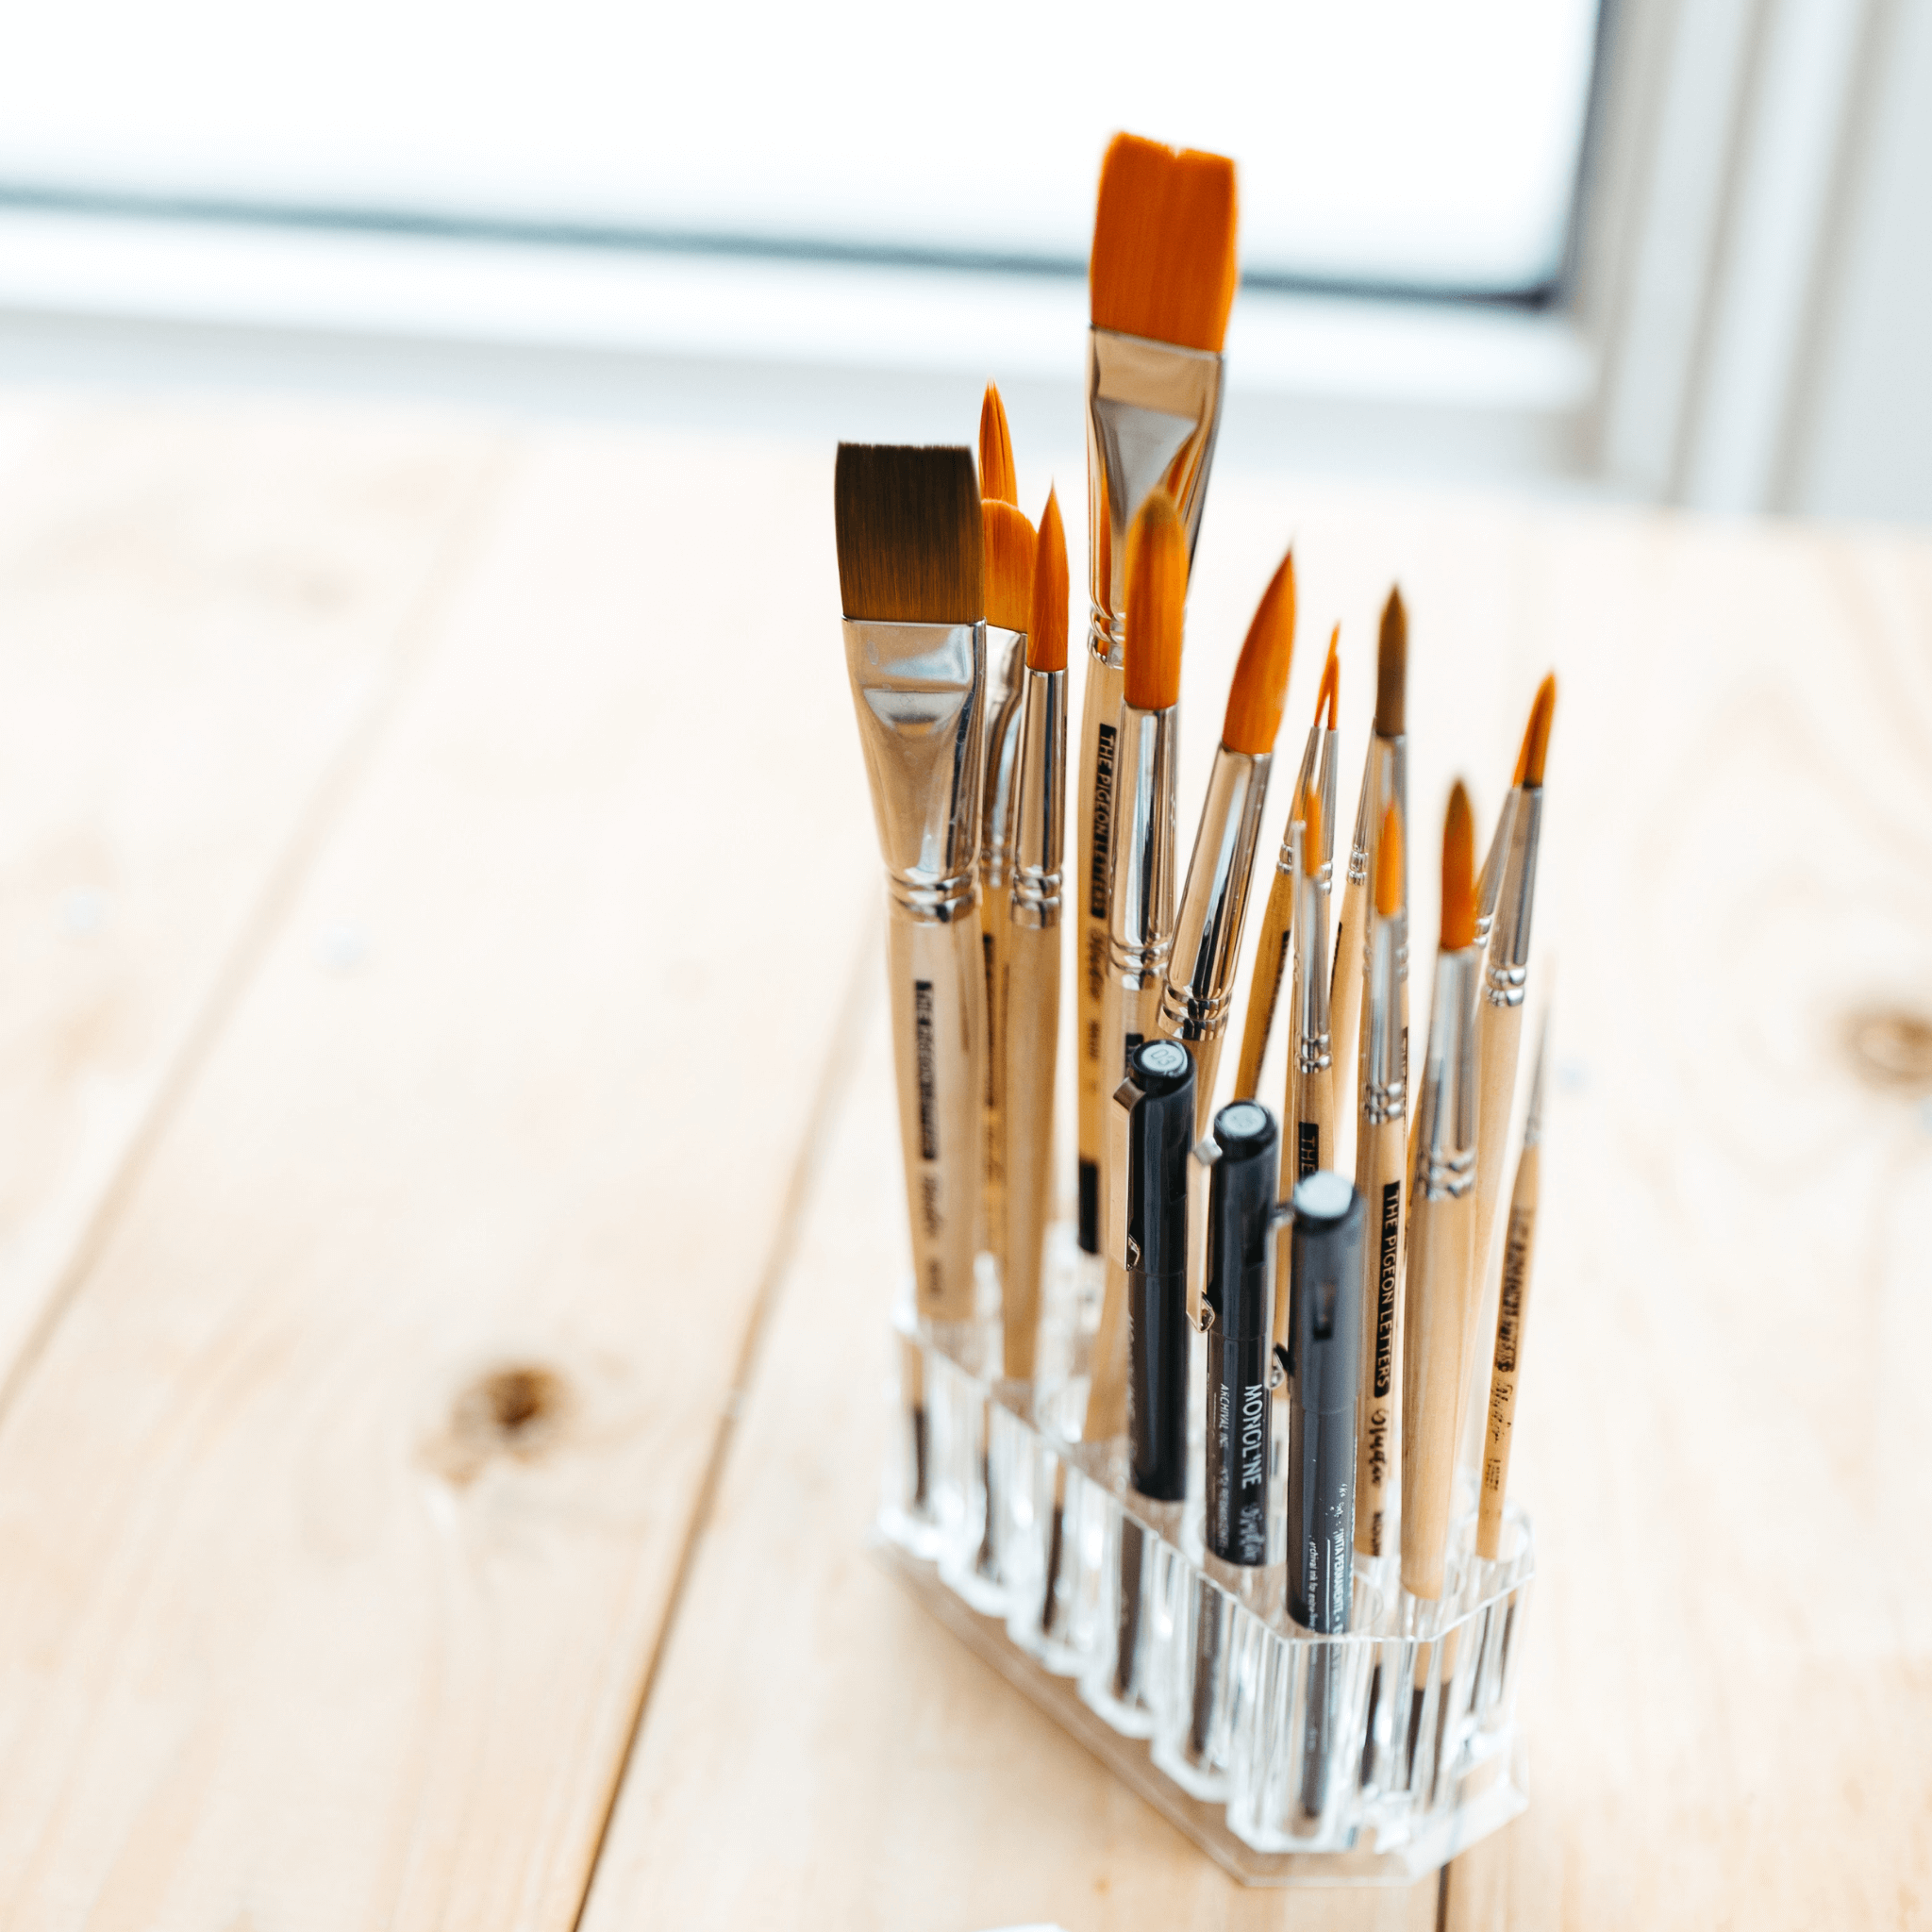 A collection of cruelty-free art supplies